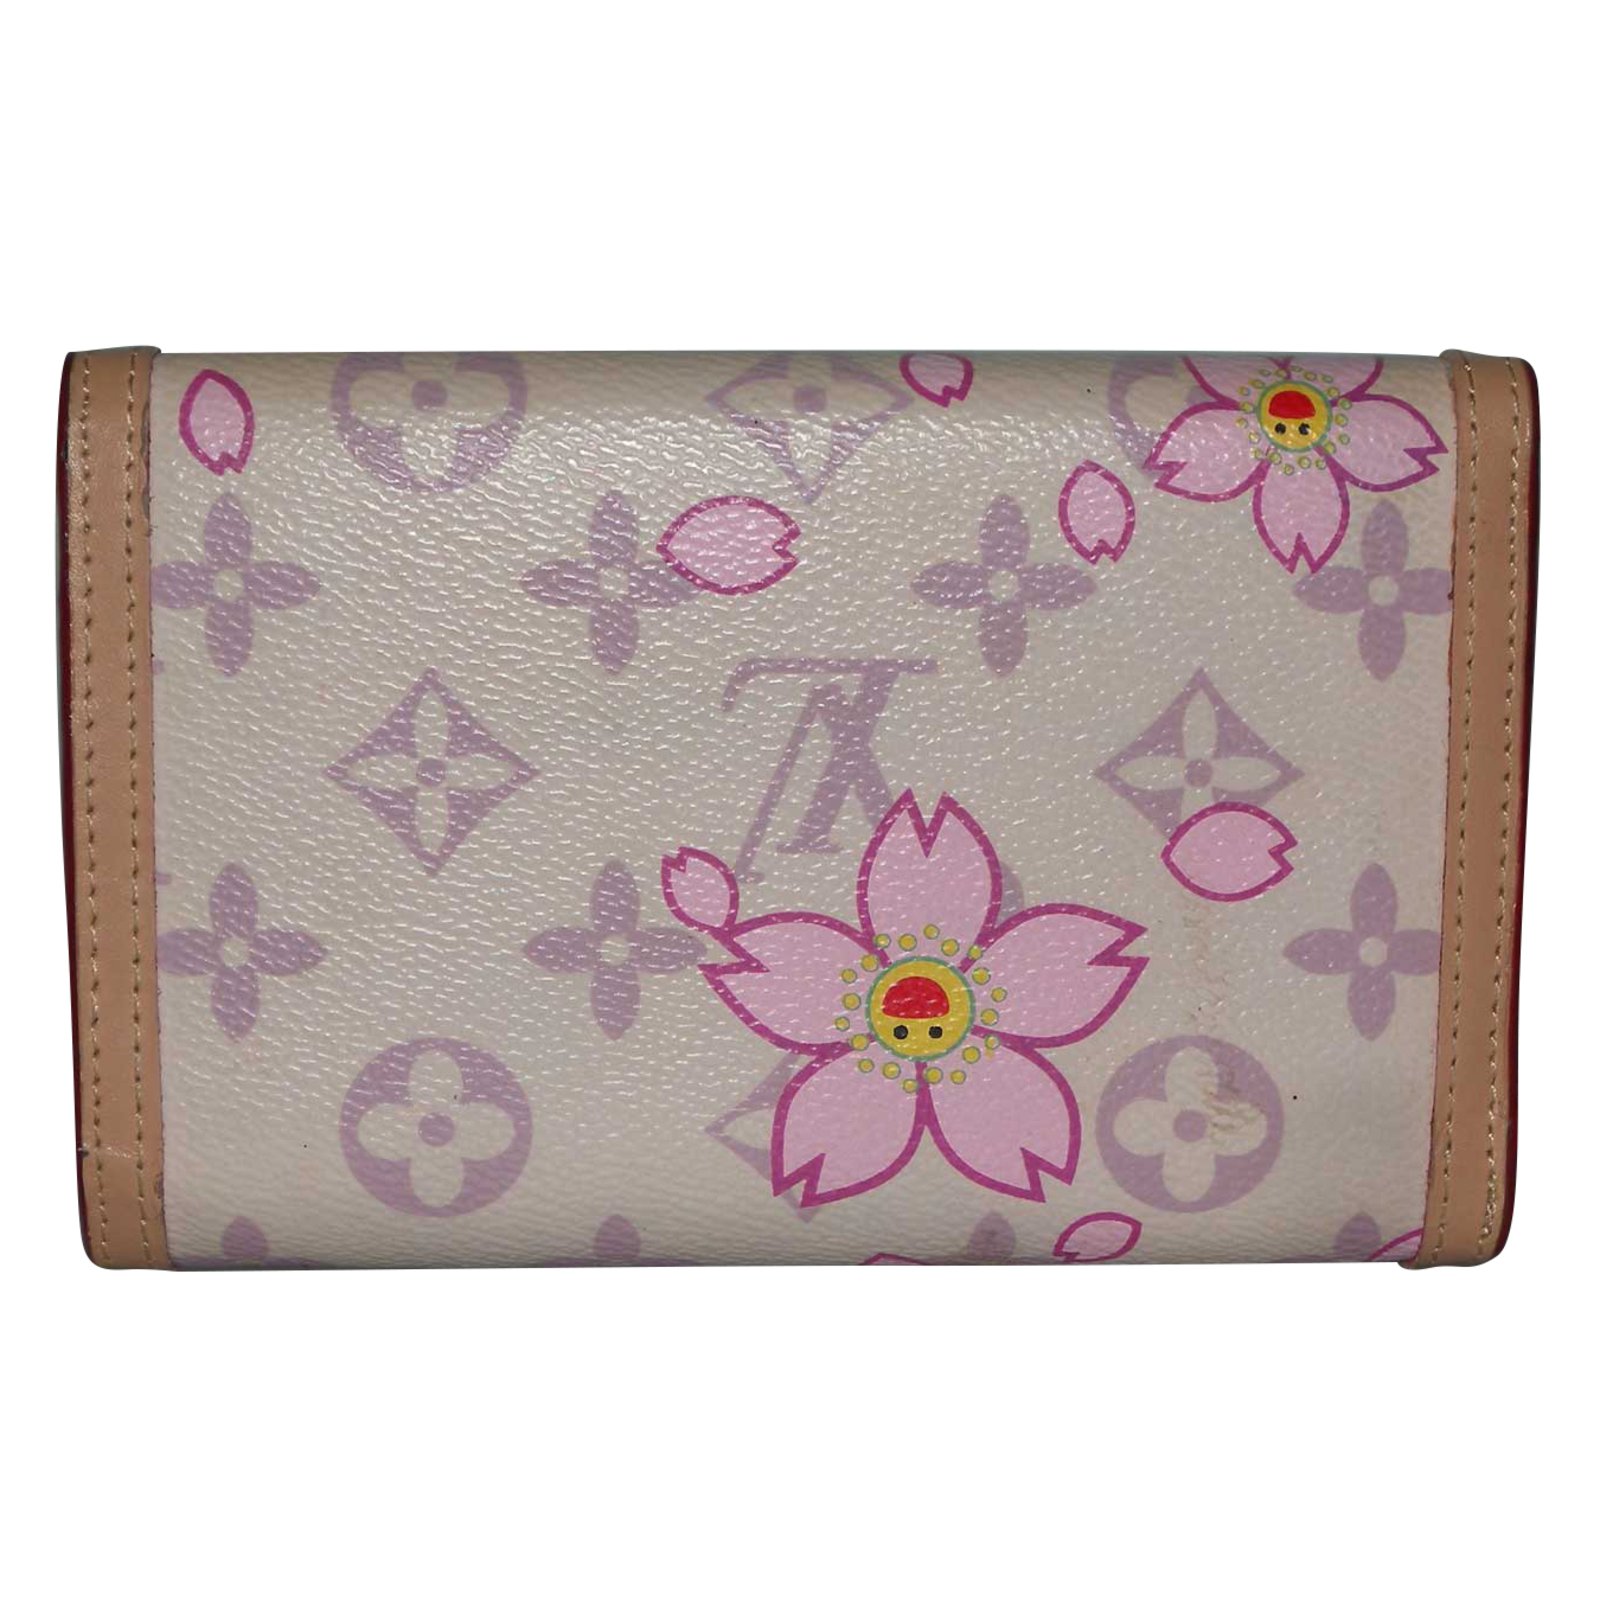 Repurposed Takashi Murakami Flowers Canvas and Leather Card holder  Cardholder Wallet - 2 slots